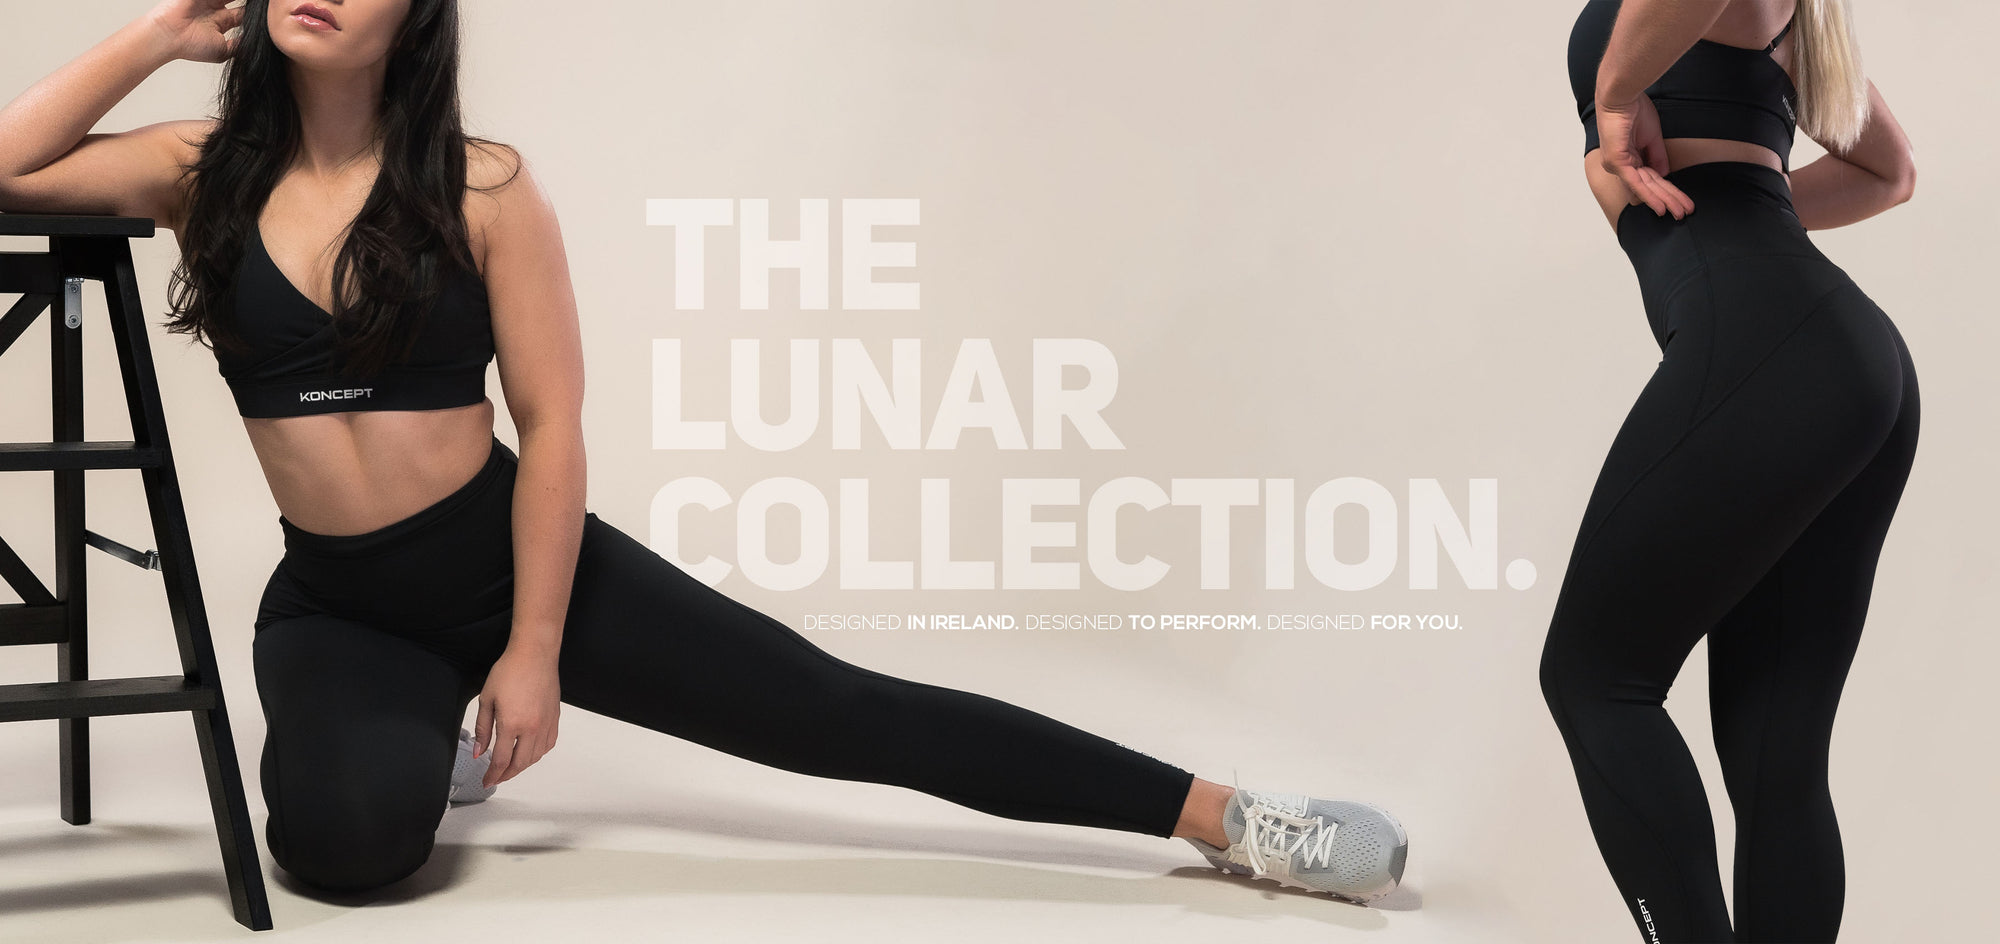 The Lunar Collection